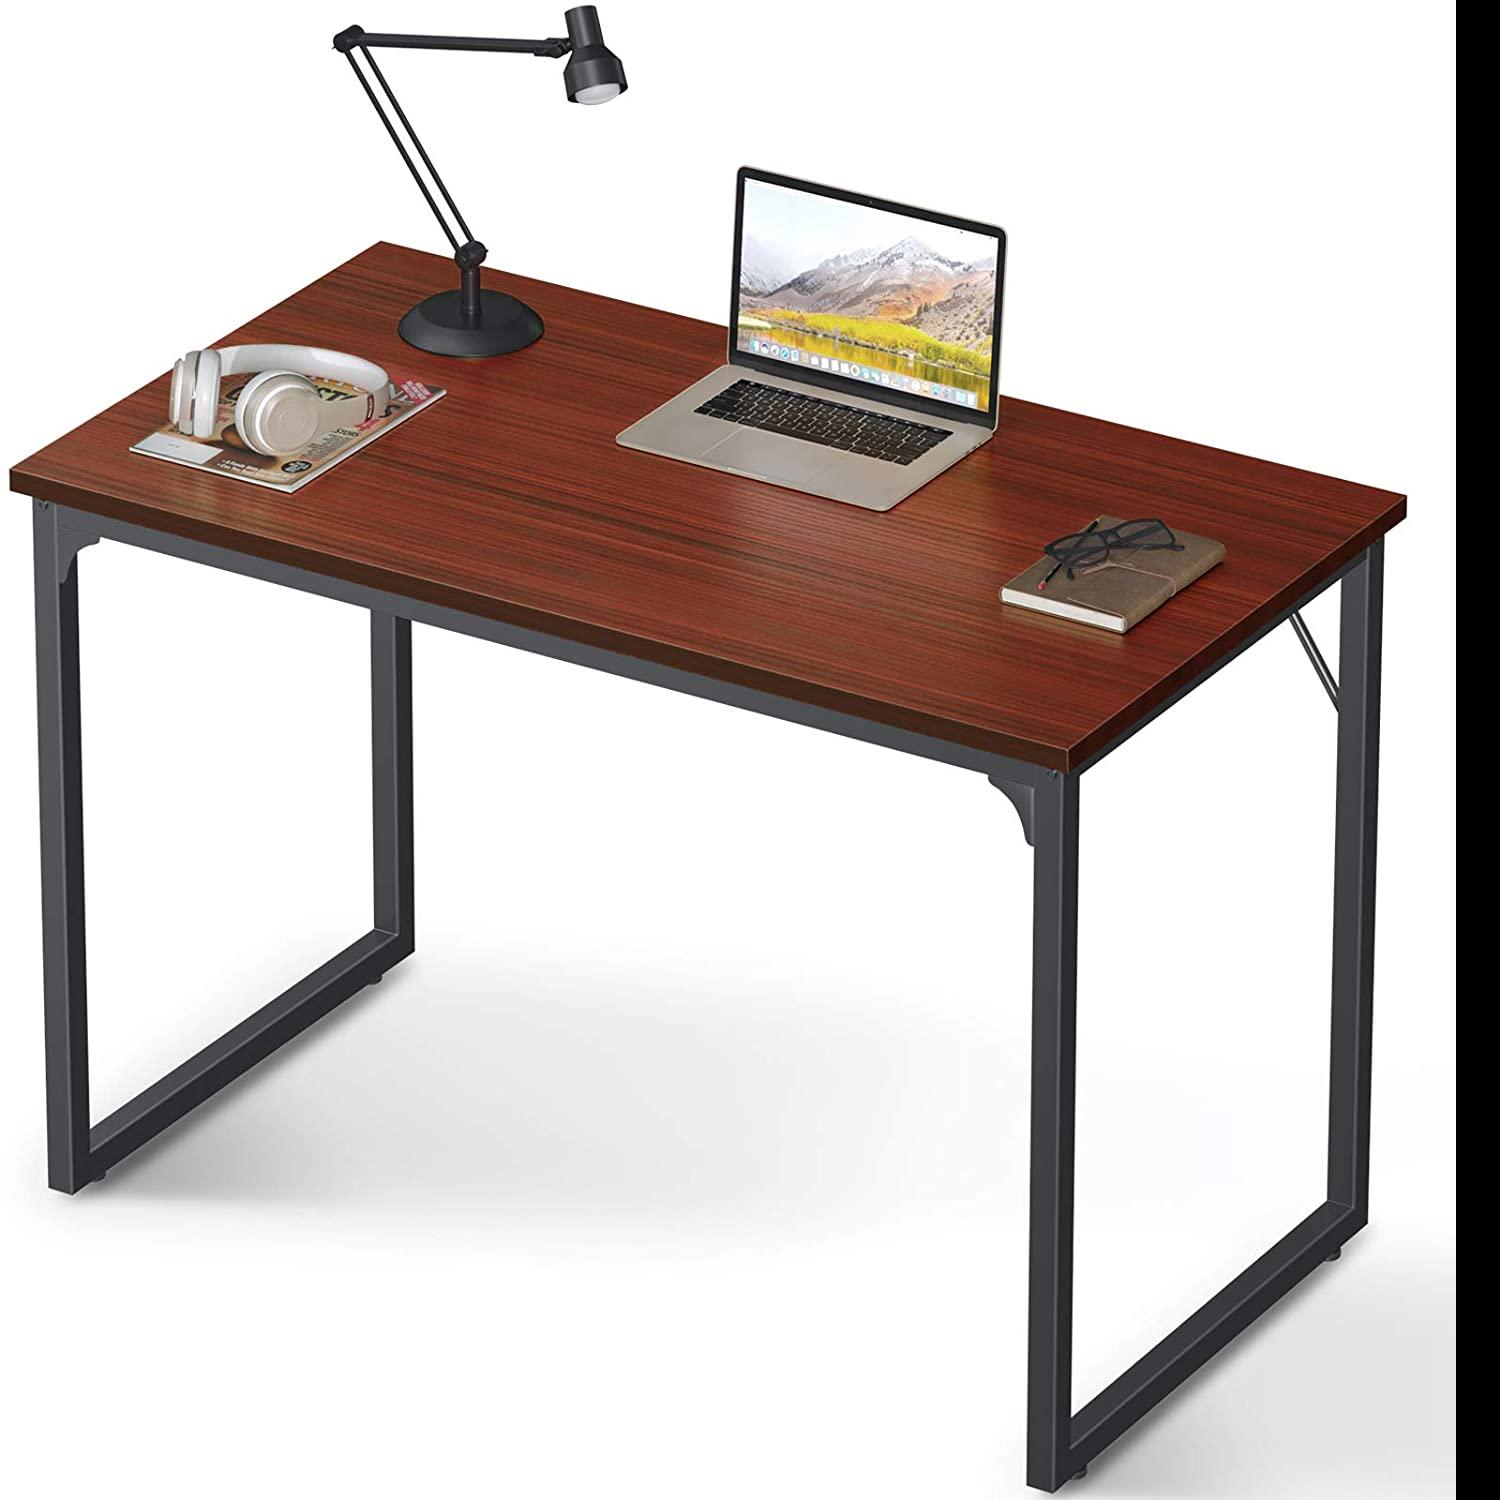 Coleshome 31in Computer Desk for $39.99 Shipped